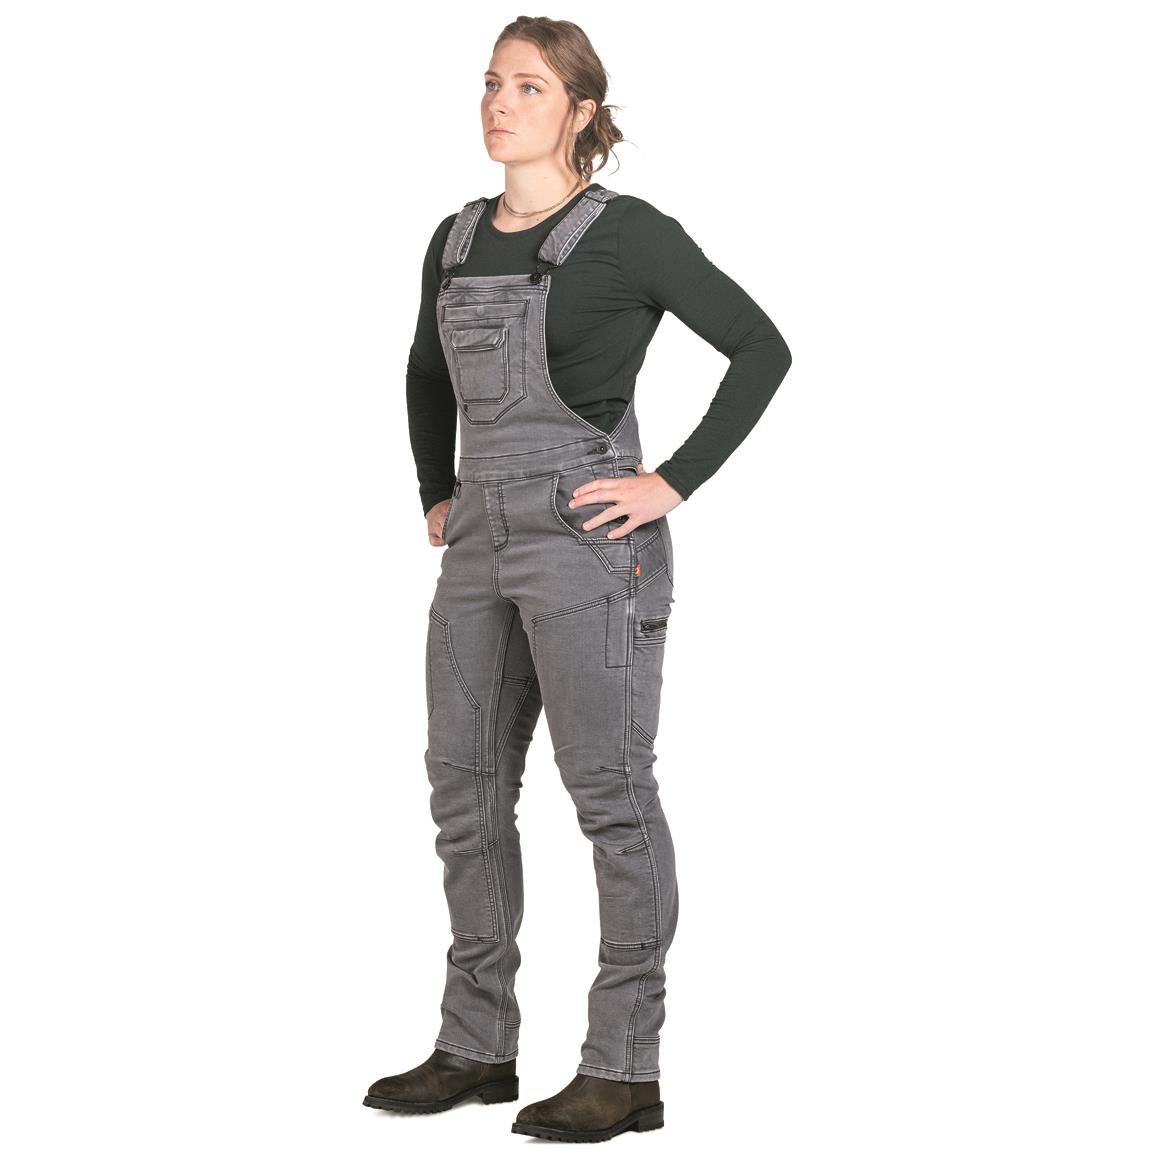 Dovetail Women's Freshley Dropseat Thermal Overalls, Grey Thermal Denim